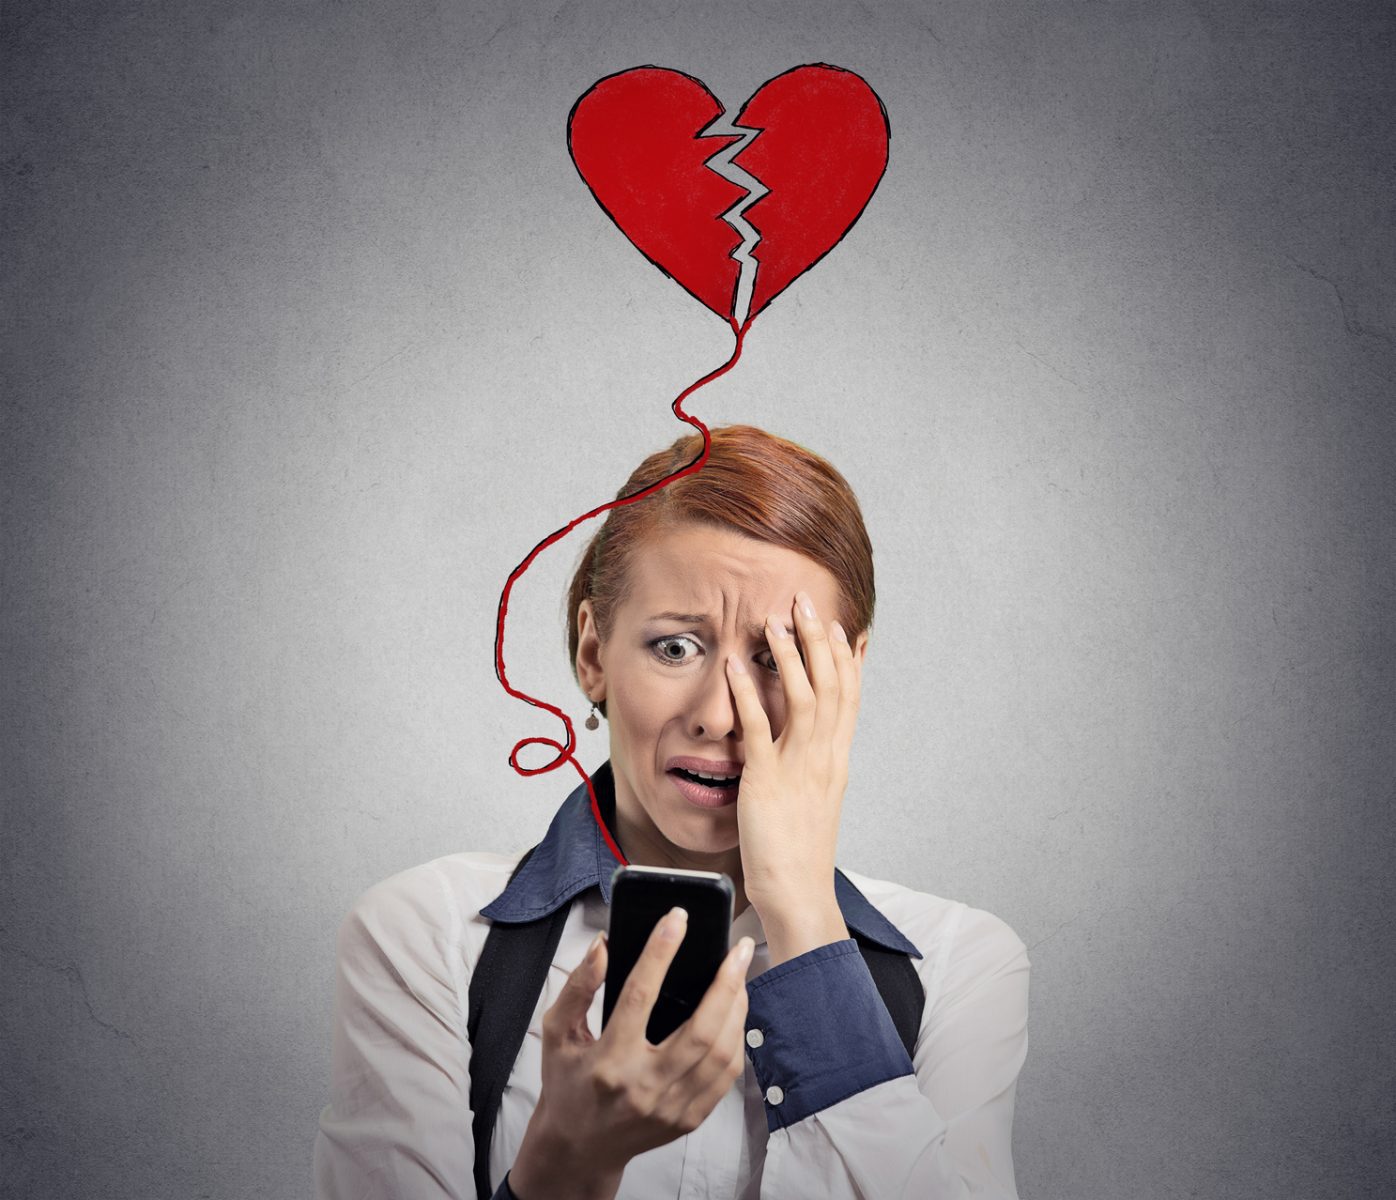 The Do’s and Don’t’s of Using Social Media While your Divorce is Pending